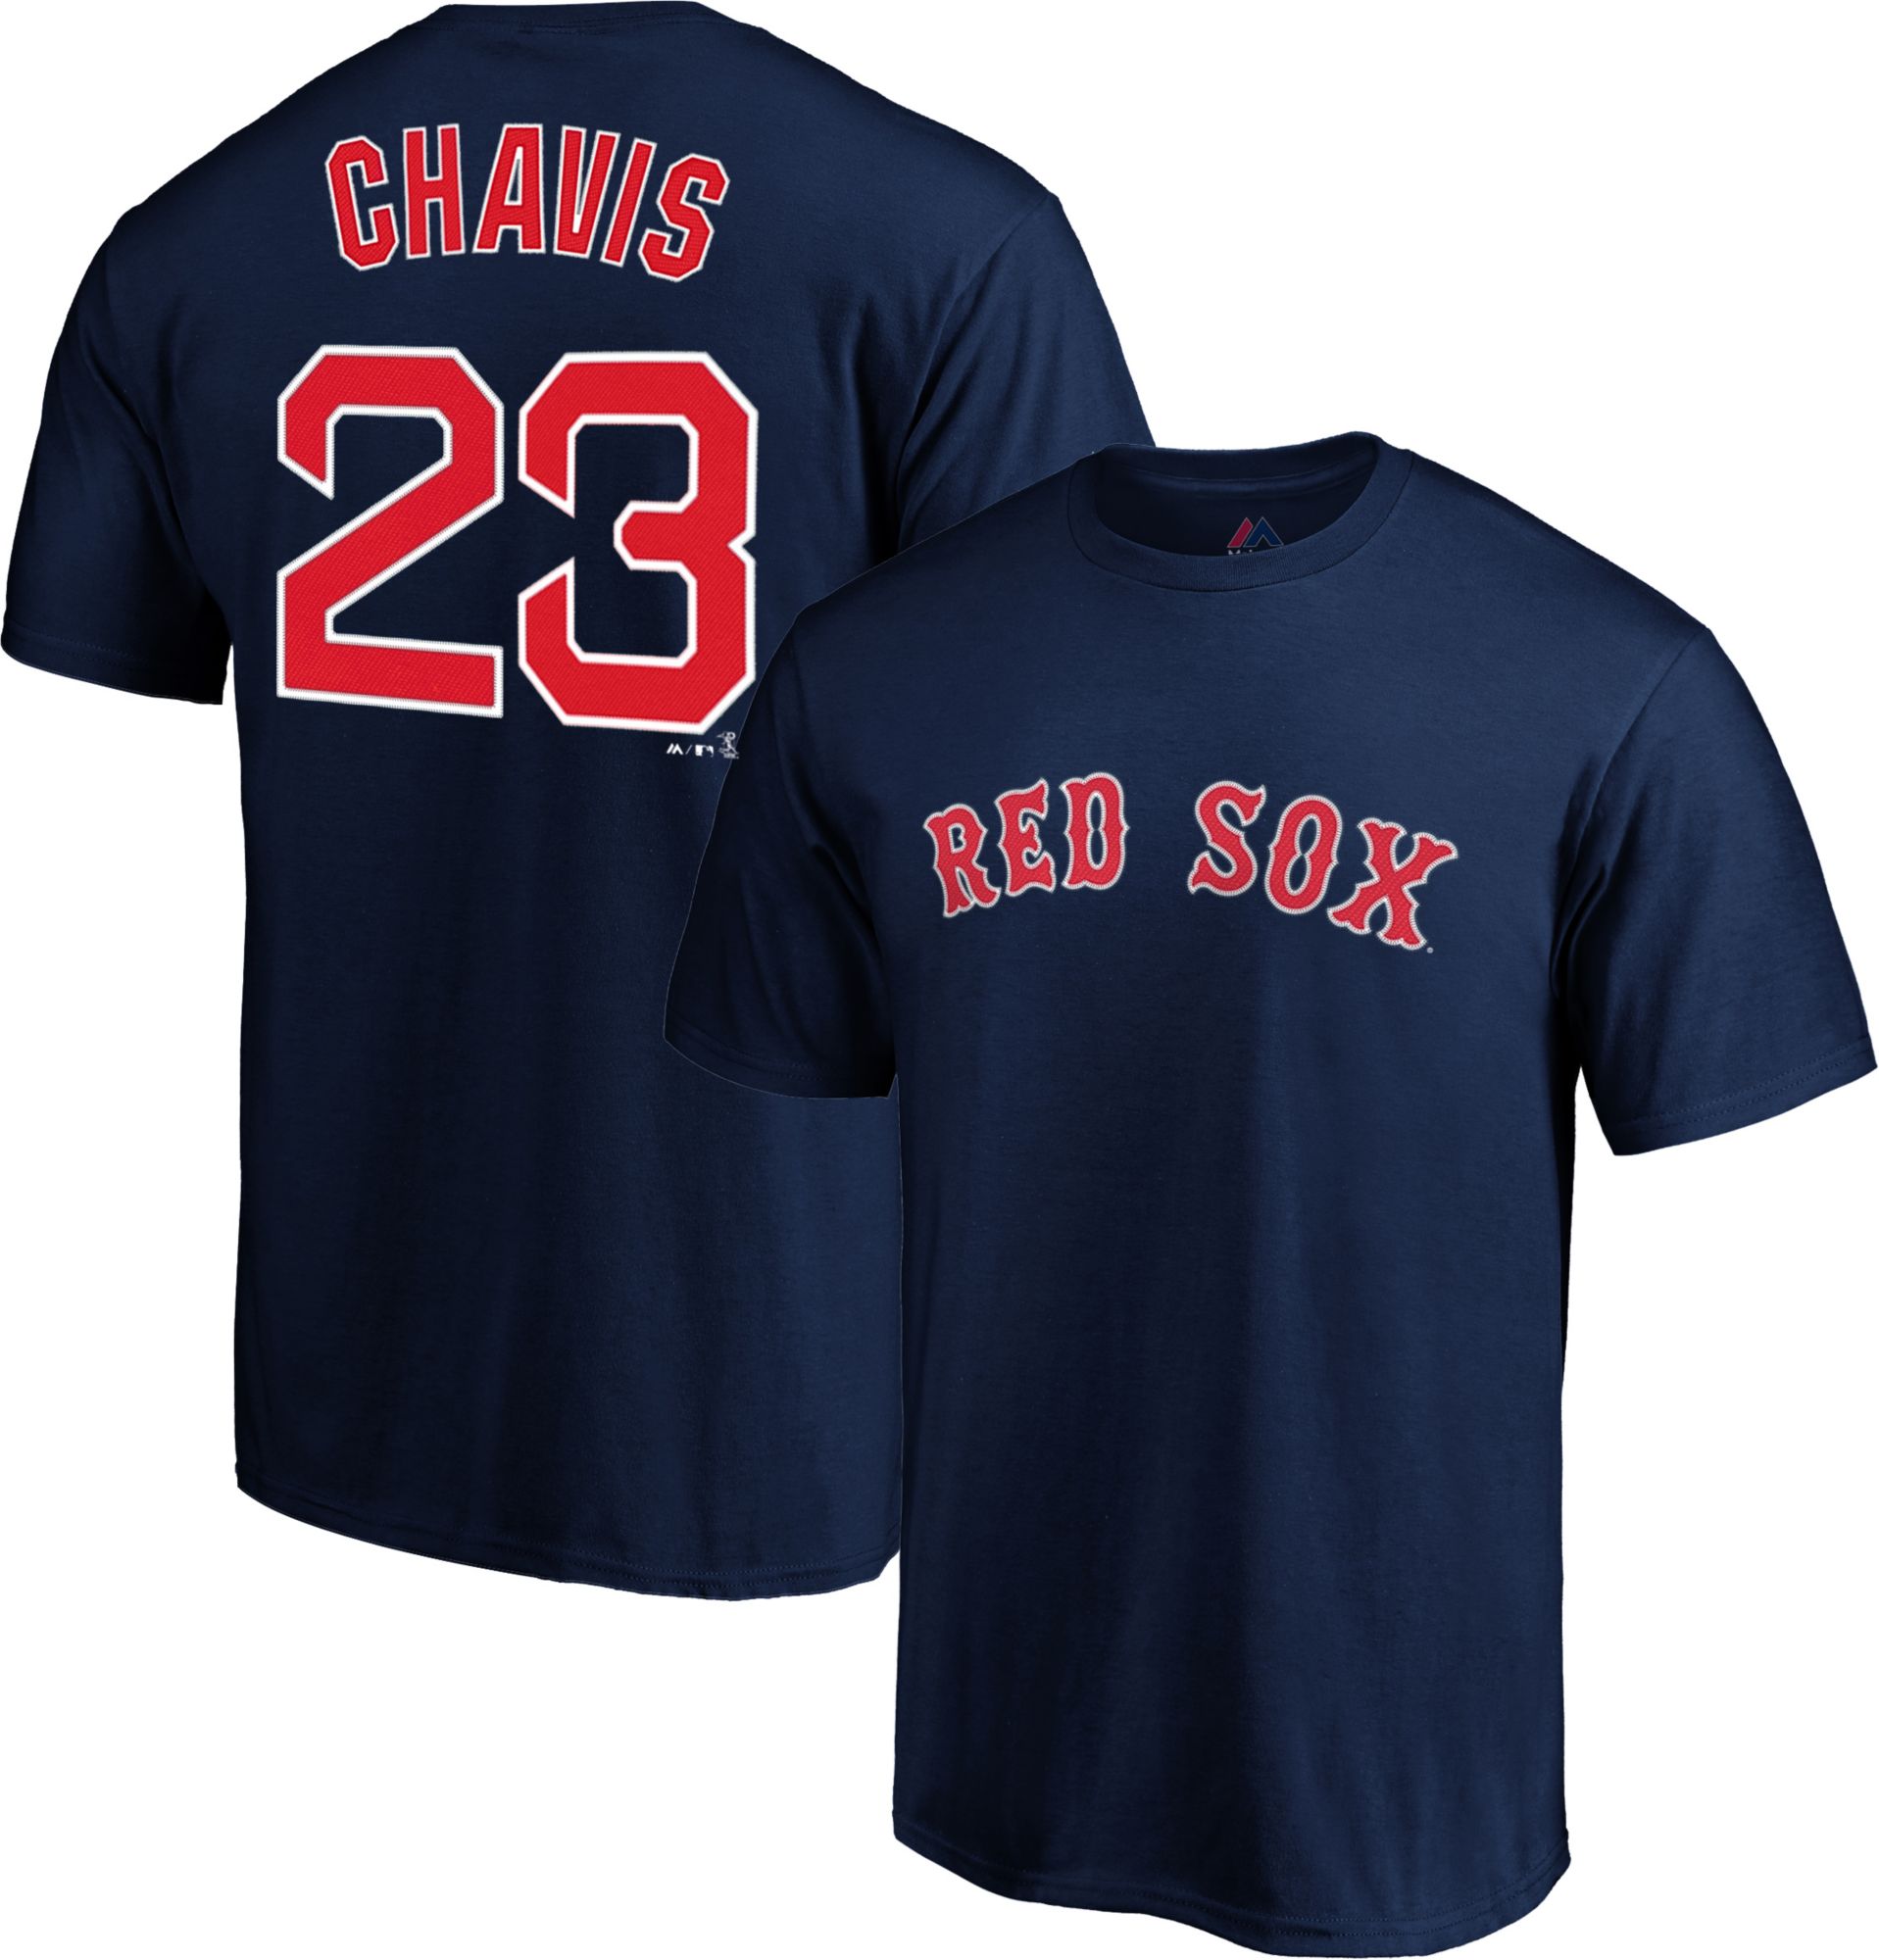 red sox 23 jersey